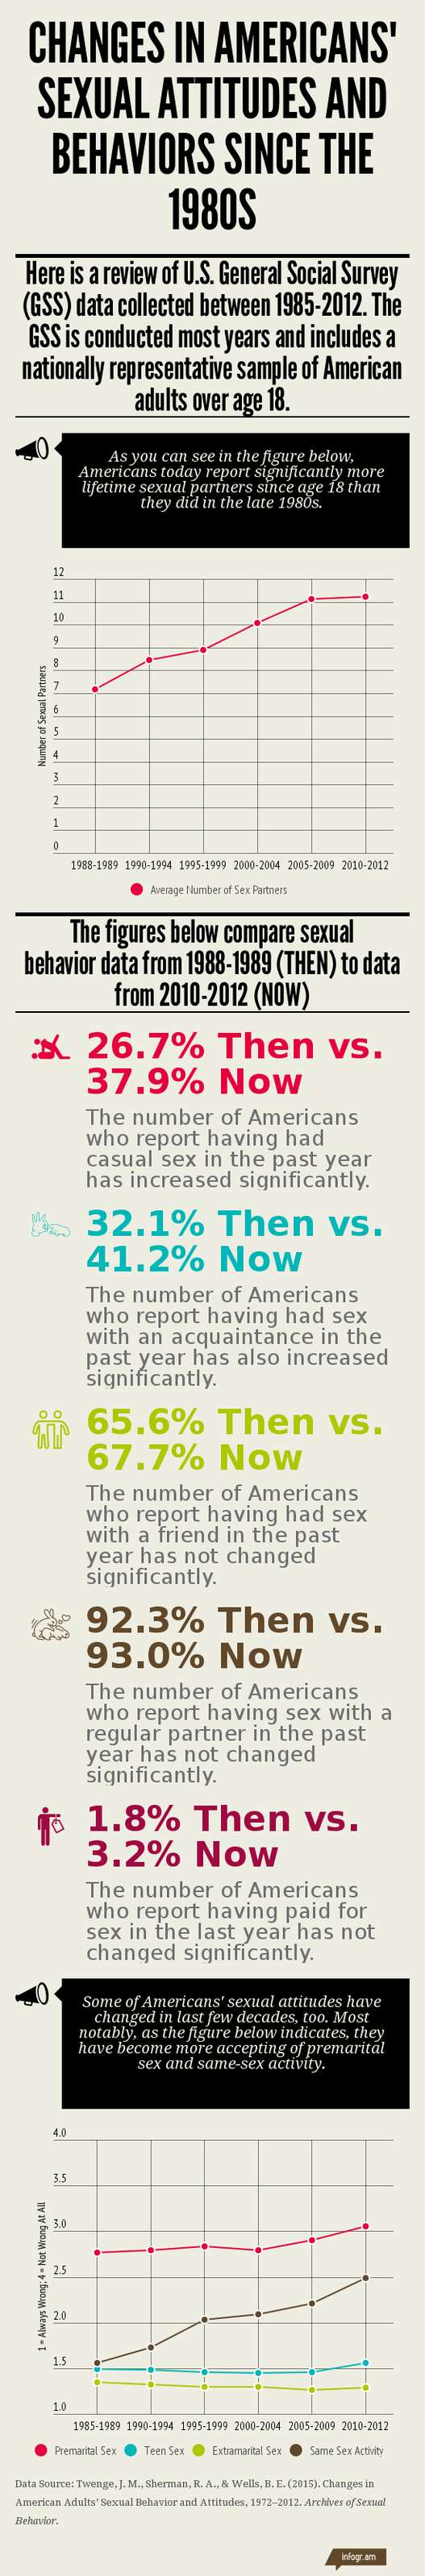 Changes in Americans' Sexual Attitudes and Behaviors Since the 1980s Infographic